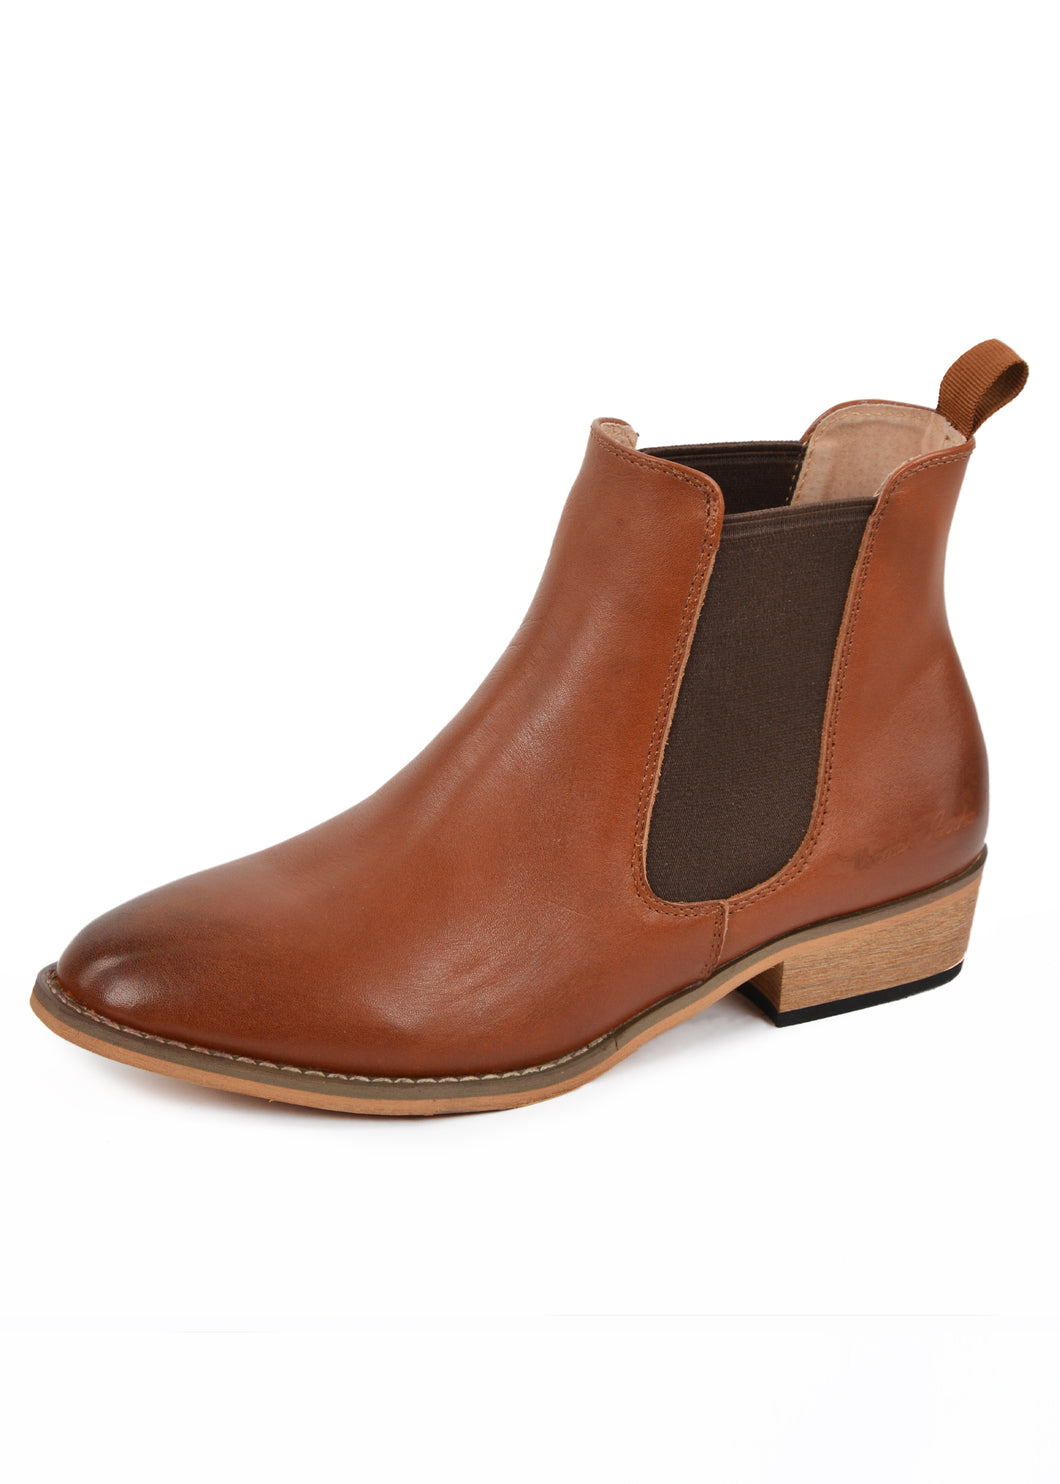 THOMAS COOK WOMENS CHELSEA BOOT